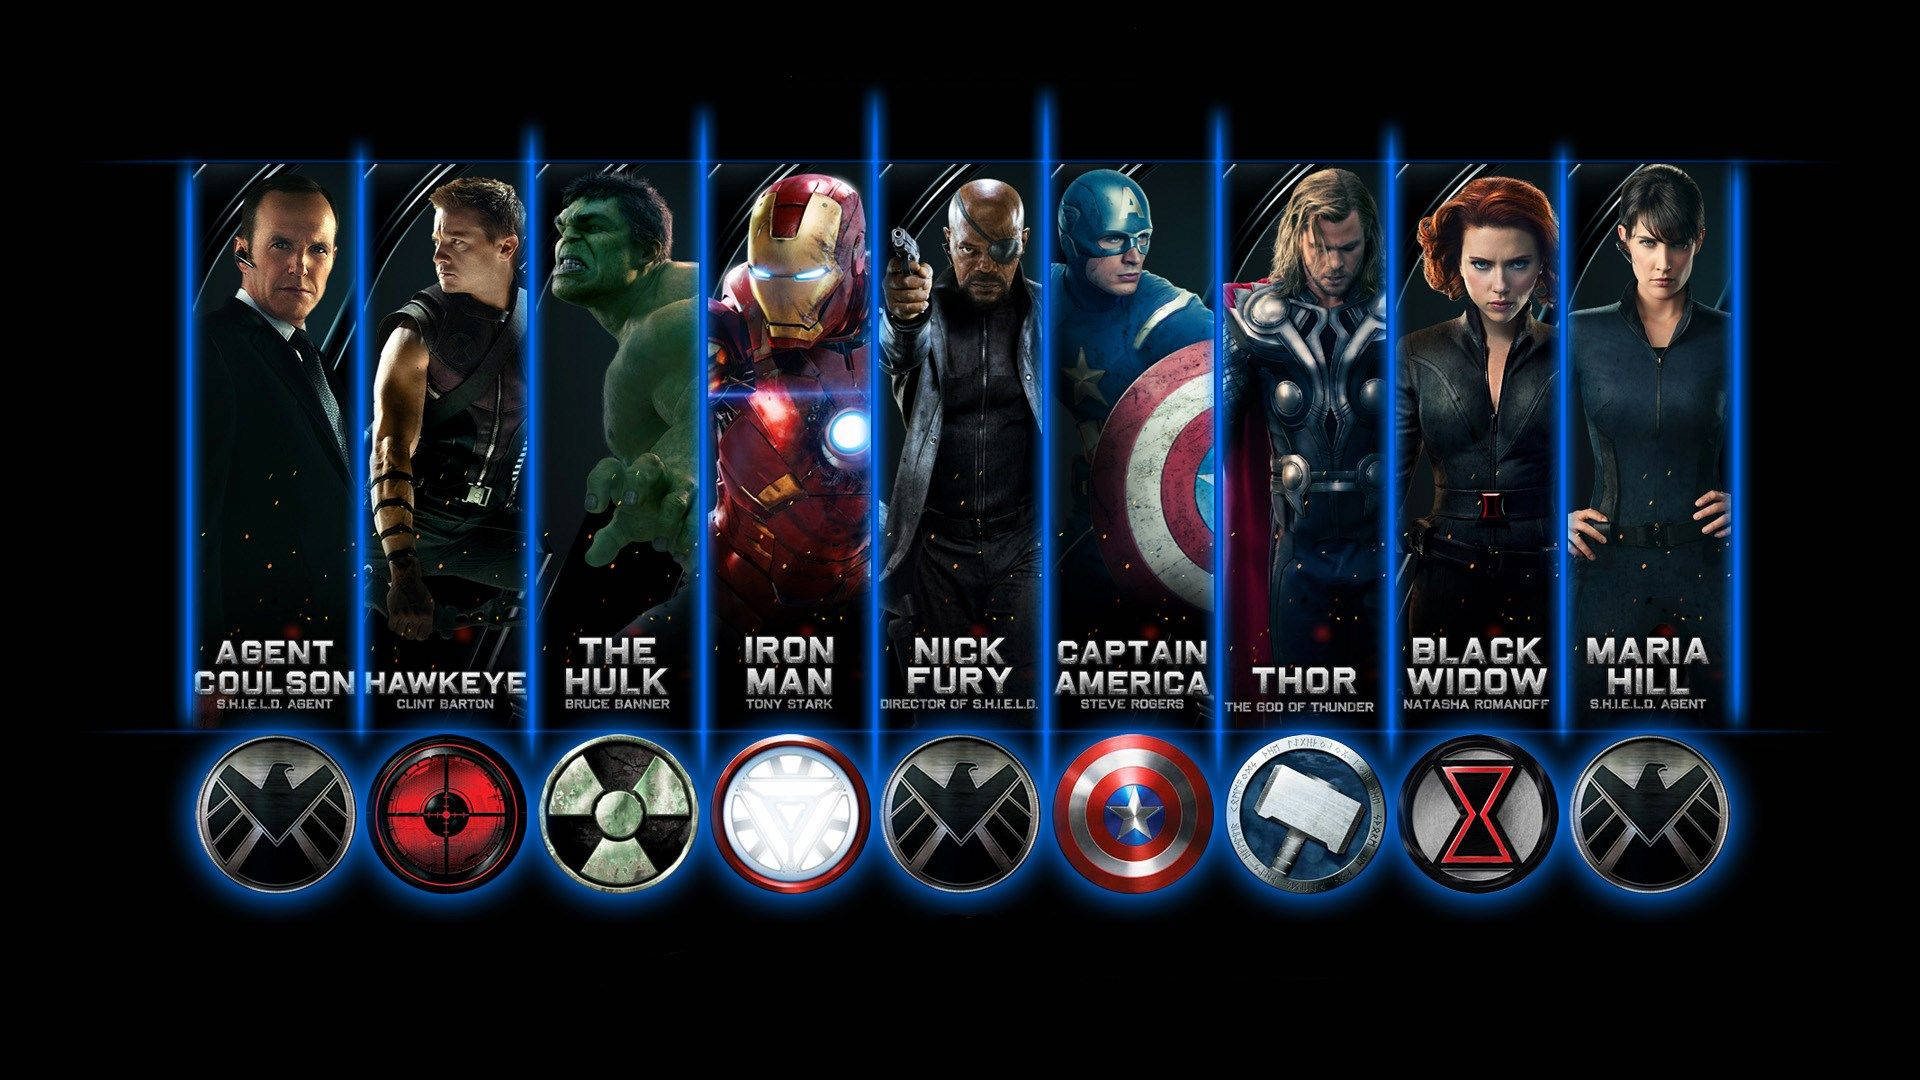 Avengers superheroes showing their superpowers below each character.